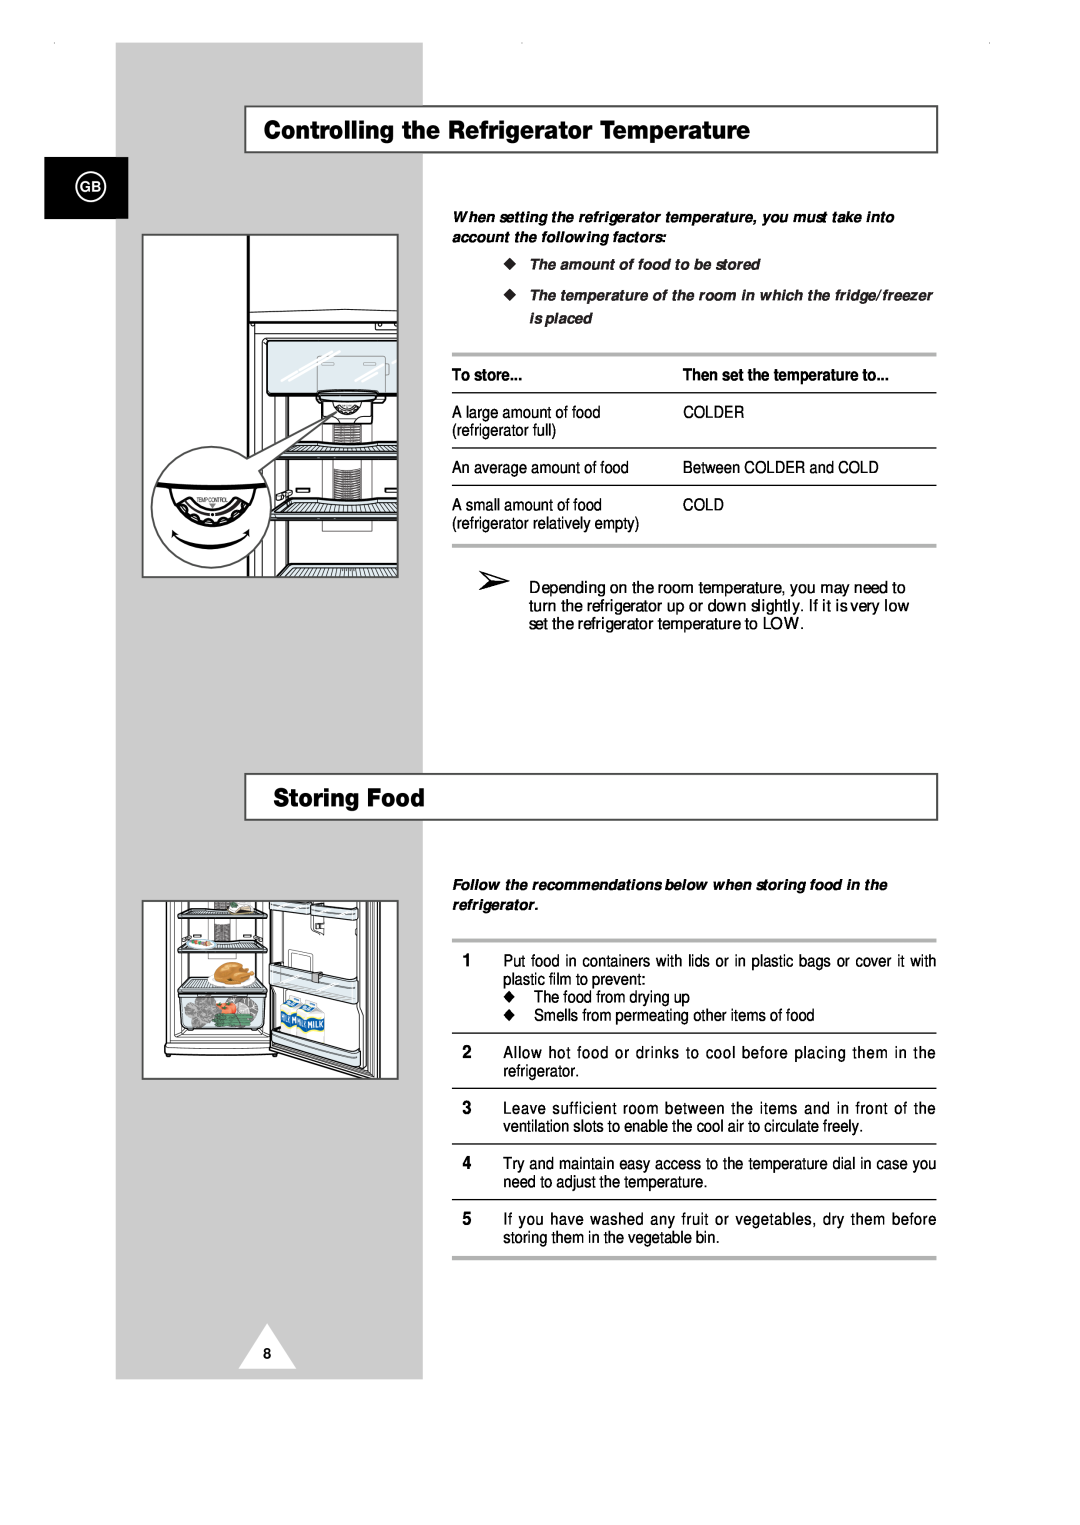 Samsung SR-28RMB Controlling the Refrigerator Temperature, Storing Food, The amount of food to be stored, To store 